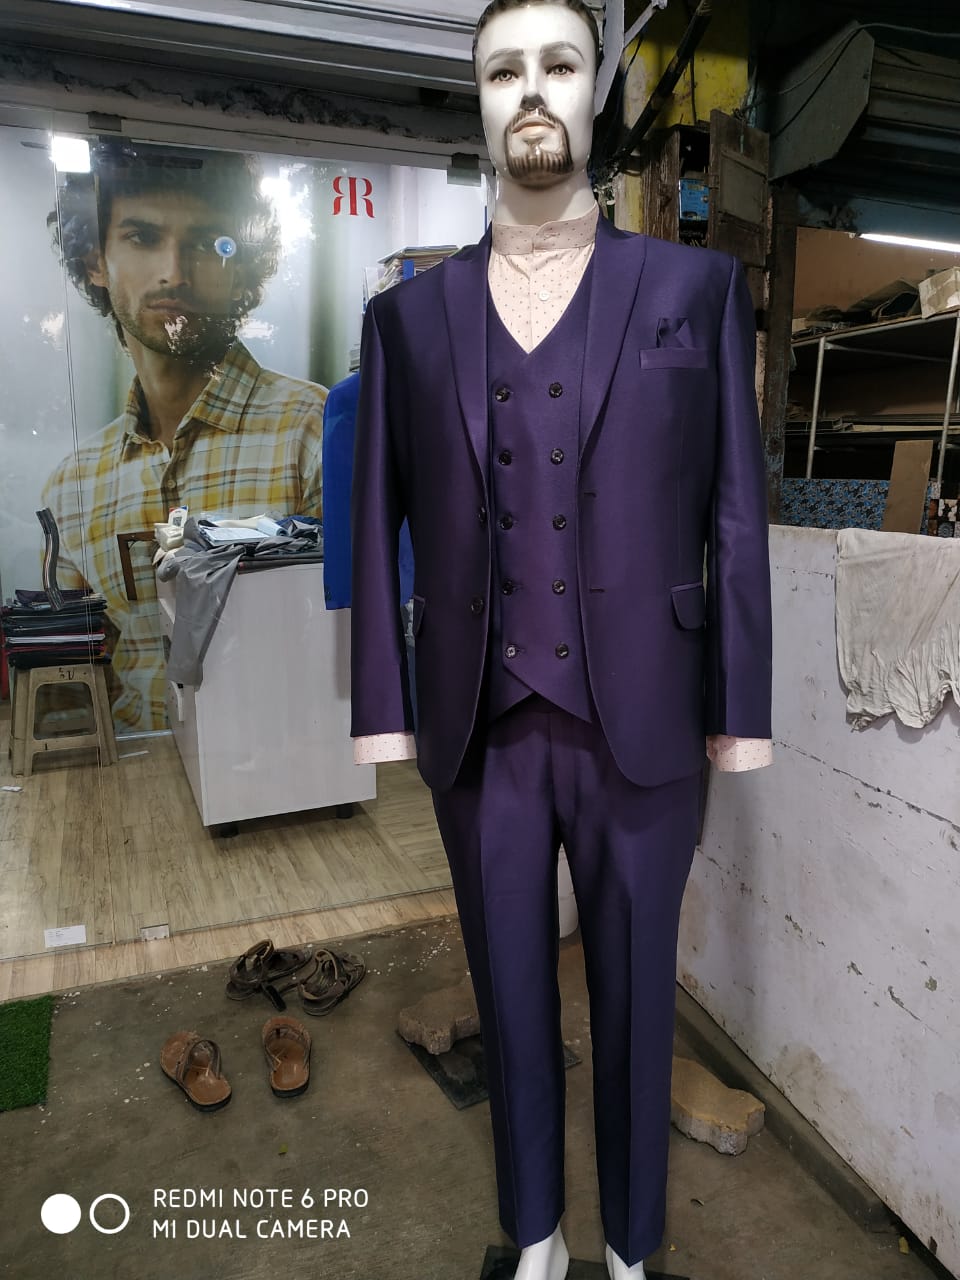 THE K.K. CLOTH STORE AND CUSTOM TAILORING